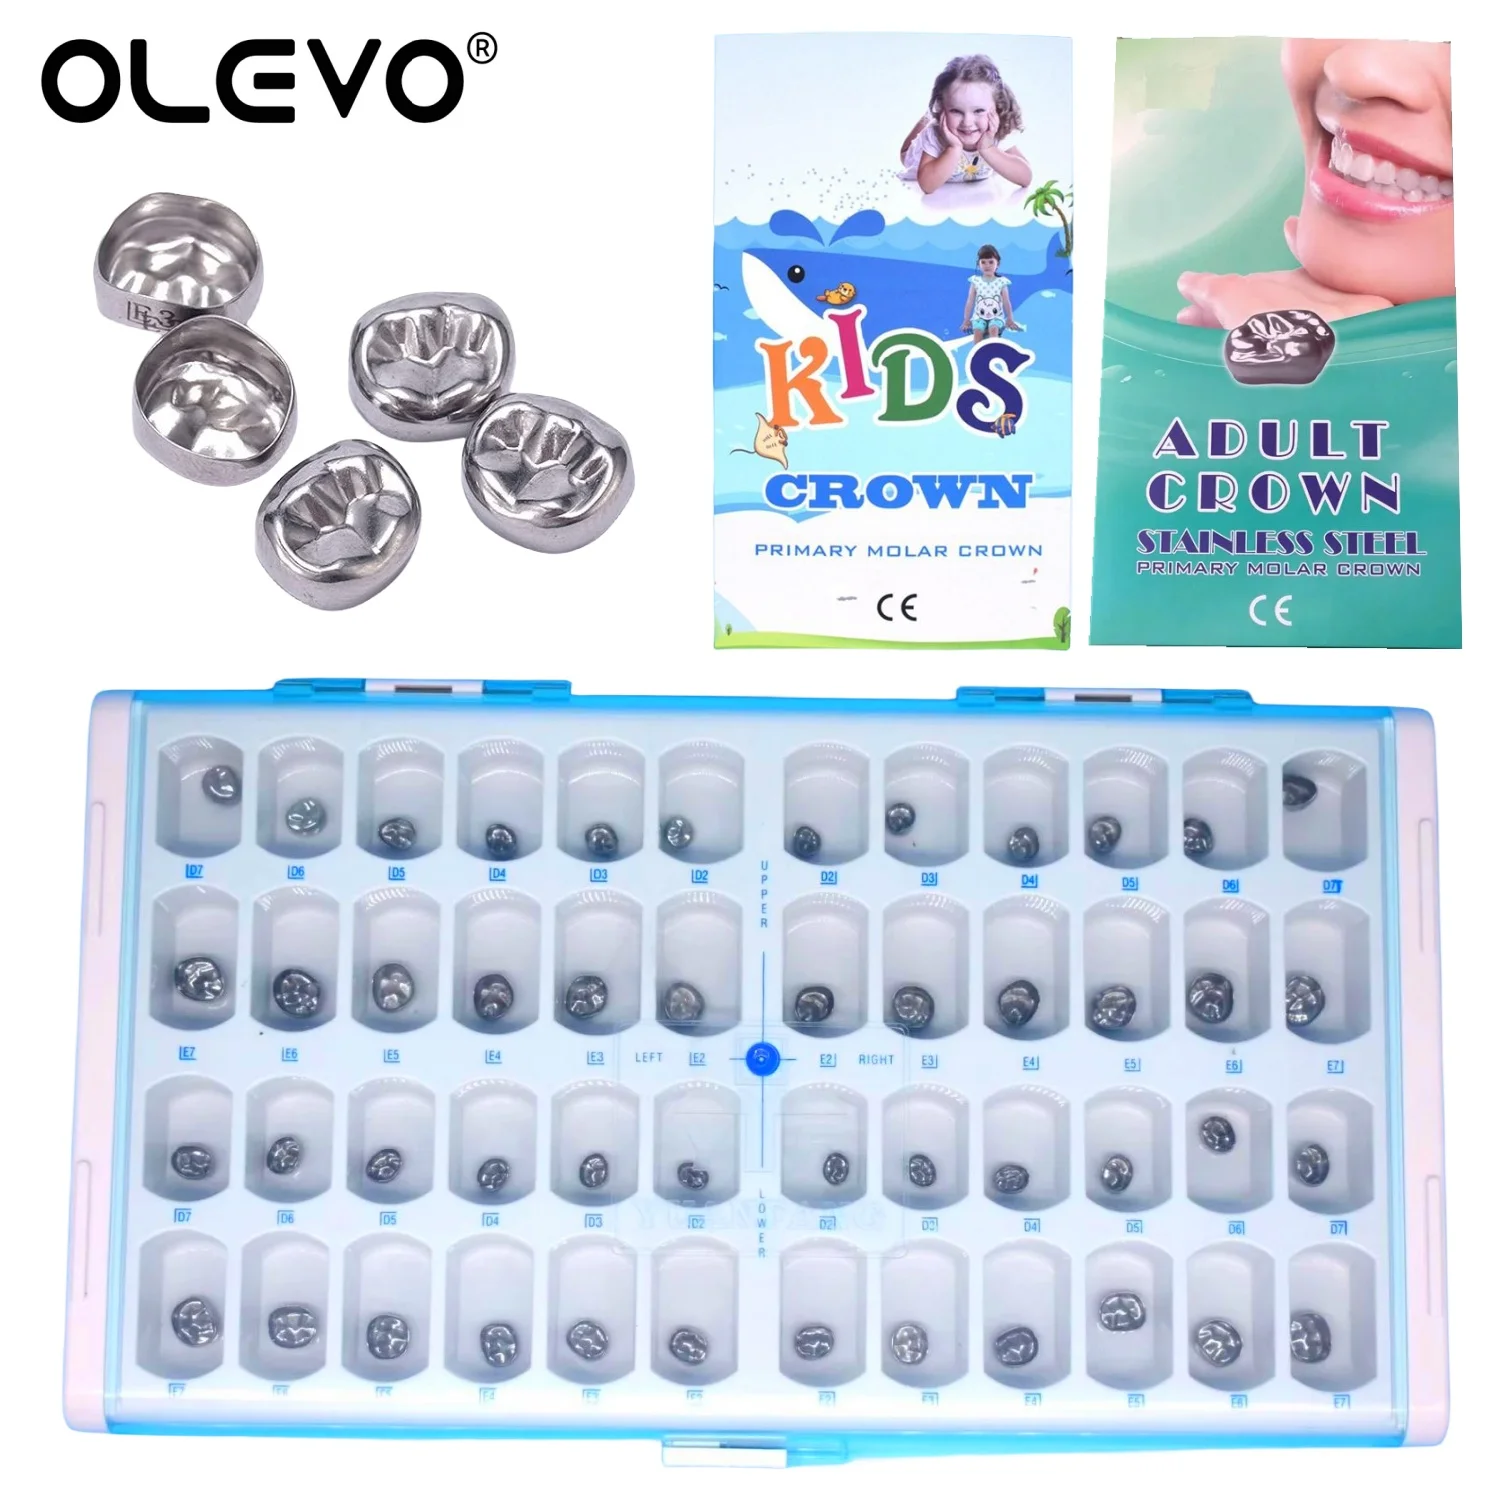 

48Pcs/Box Dental Crowns Preformed Metal Crown Primary Molar Kid Adult Crown Stainless Steel Temporary Crown Tooth Protection